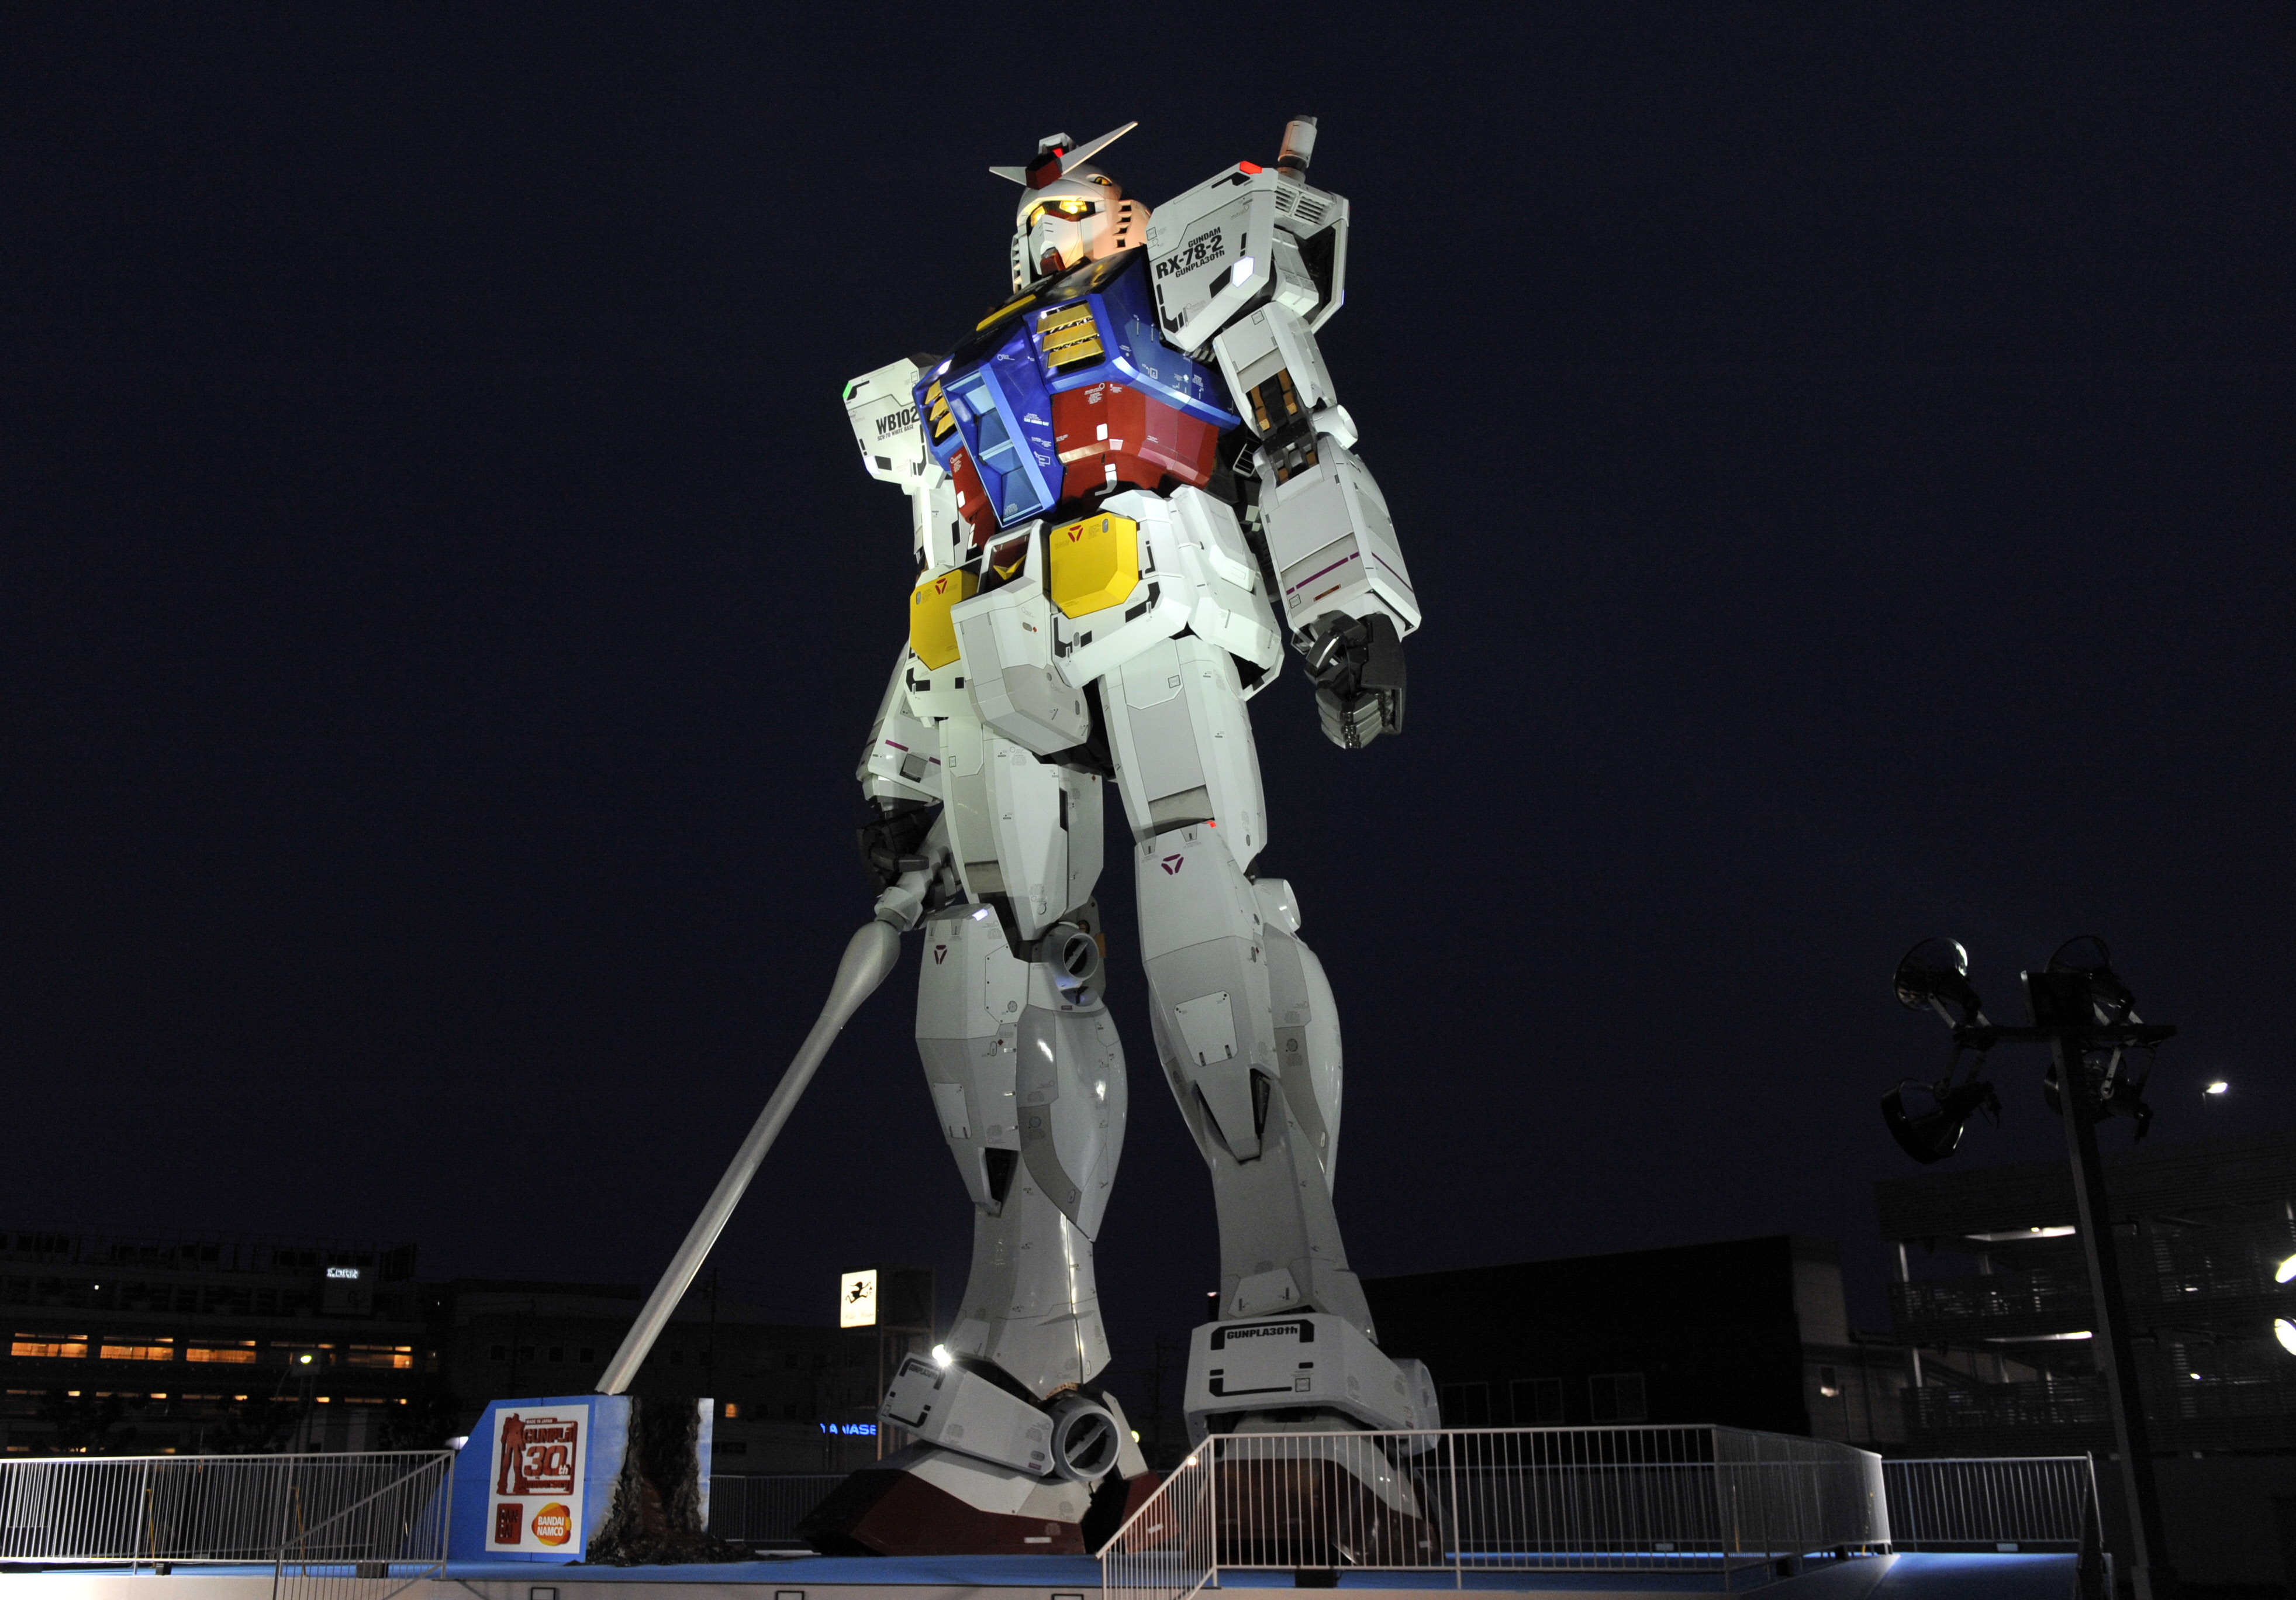 An 18-metre tall statue of popular TV animation hero Gundam is lit up at a park in Shizuoka city, 150km west of Tokyo on July 6, 2010 for a press preview. The huge statue of the life sized robot, which attracted over 3 million spectators in Tokyo last year, will be displayed for the commemoration of the 30th anniversary of the establishment of the Gundam plastic models. The statue will be opened to the public from July 24 through the early next year. AFP PHOTO/YOSHIKAZU TSUNO (Photo credit should read YOSHIKAZU TSUNO/AFP via Getty Images)